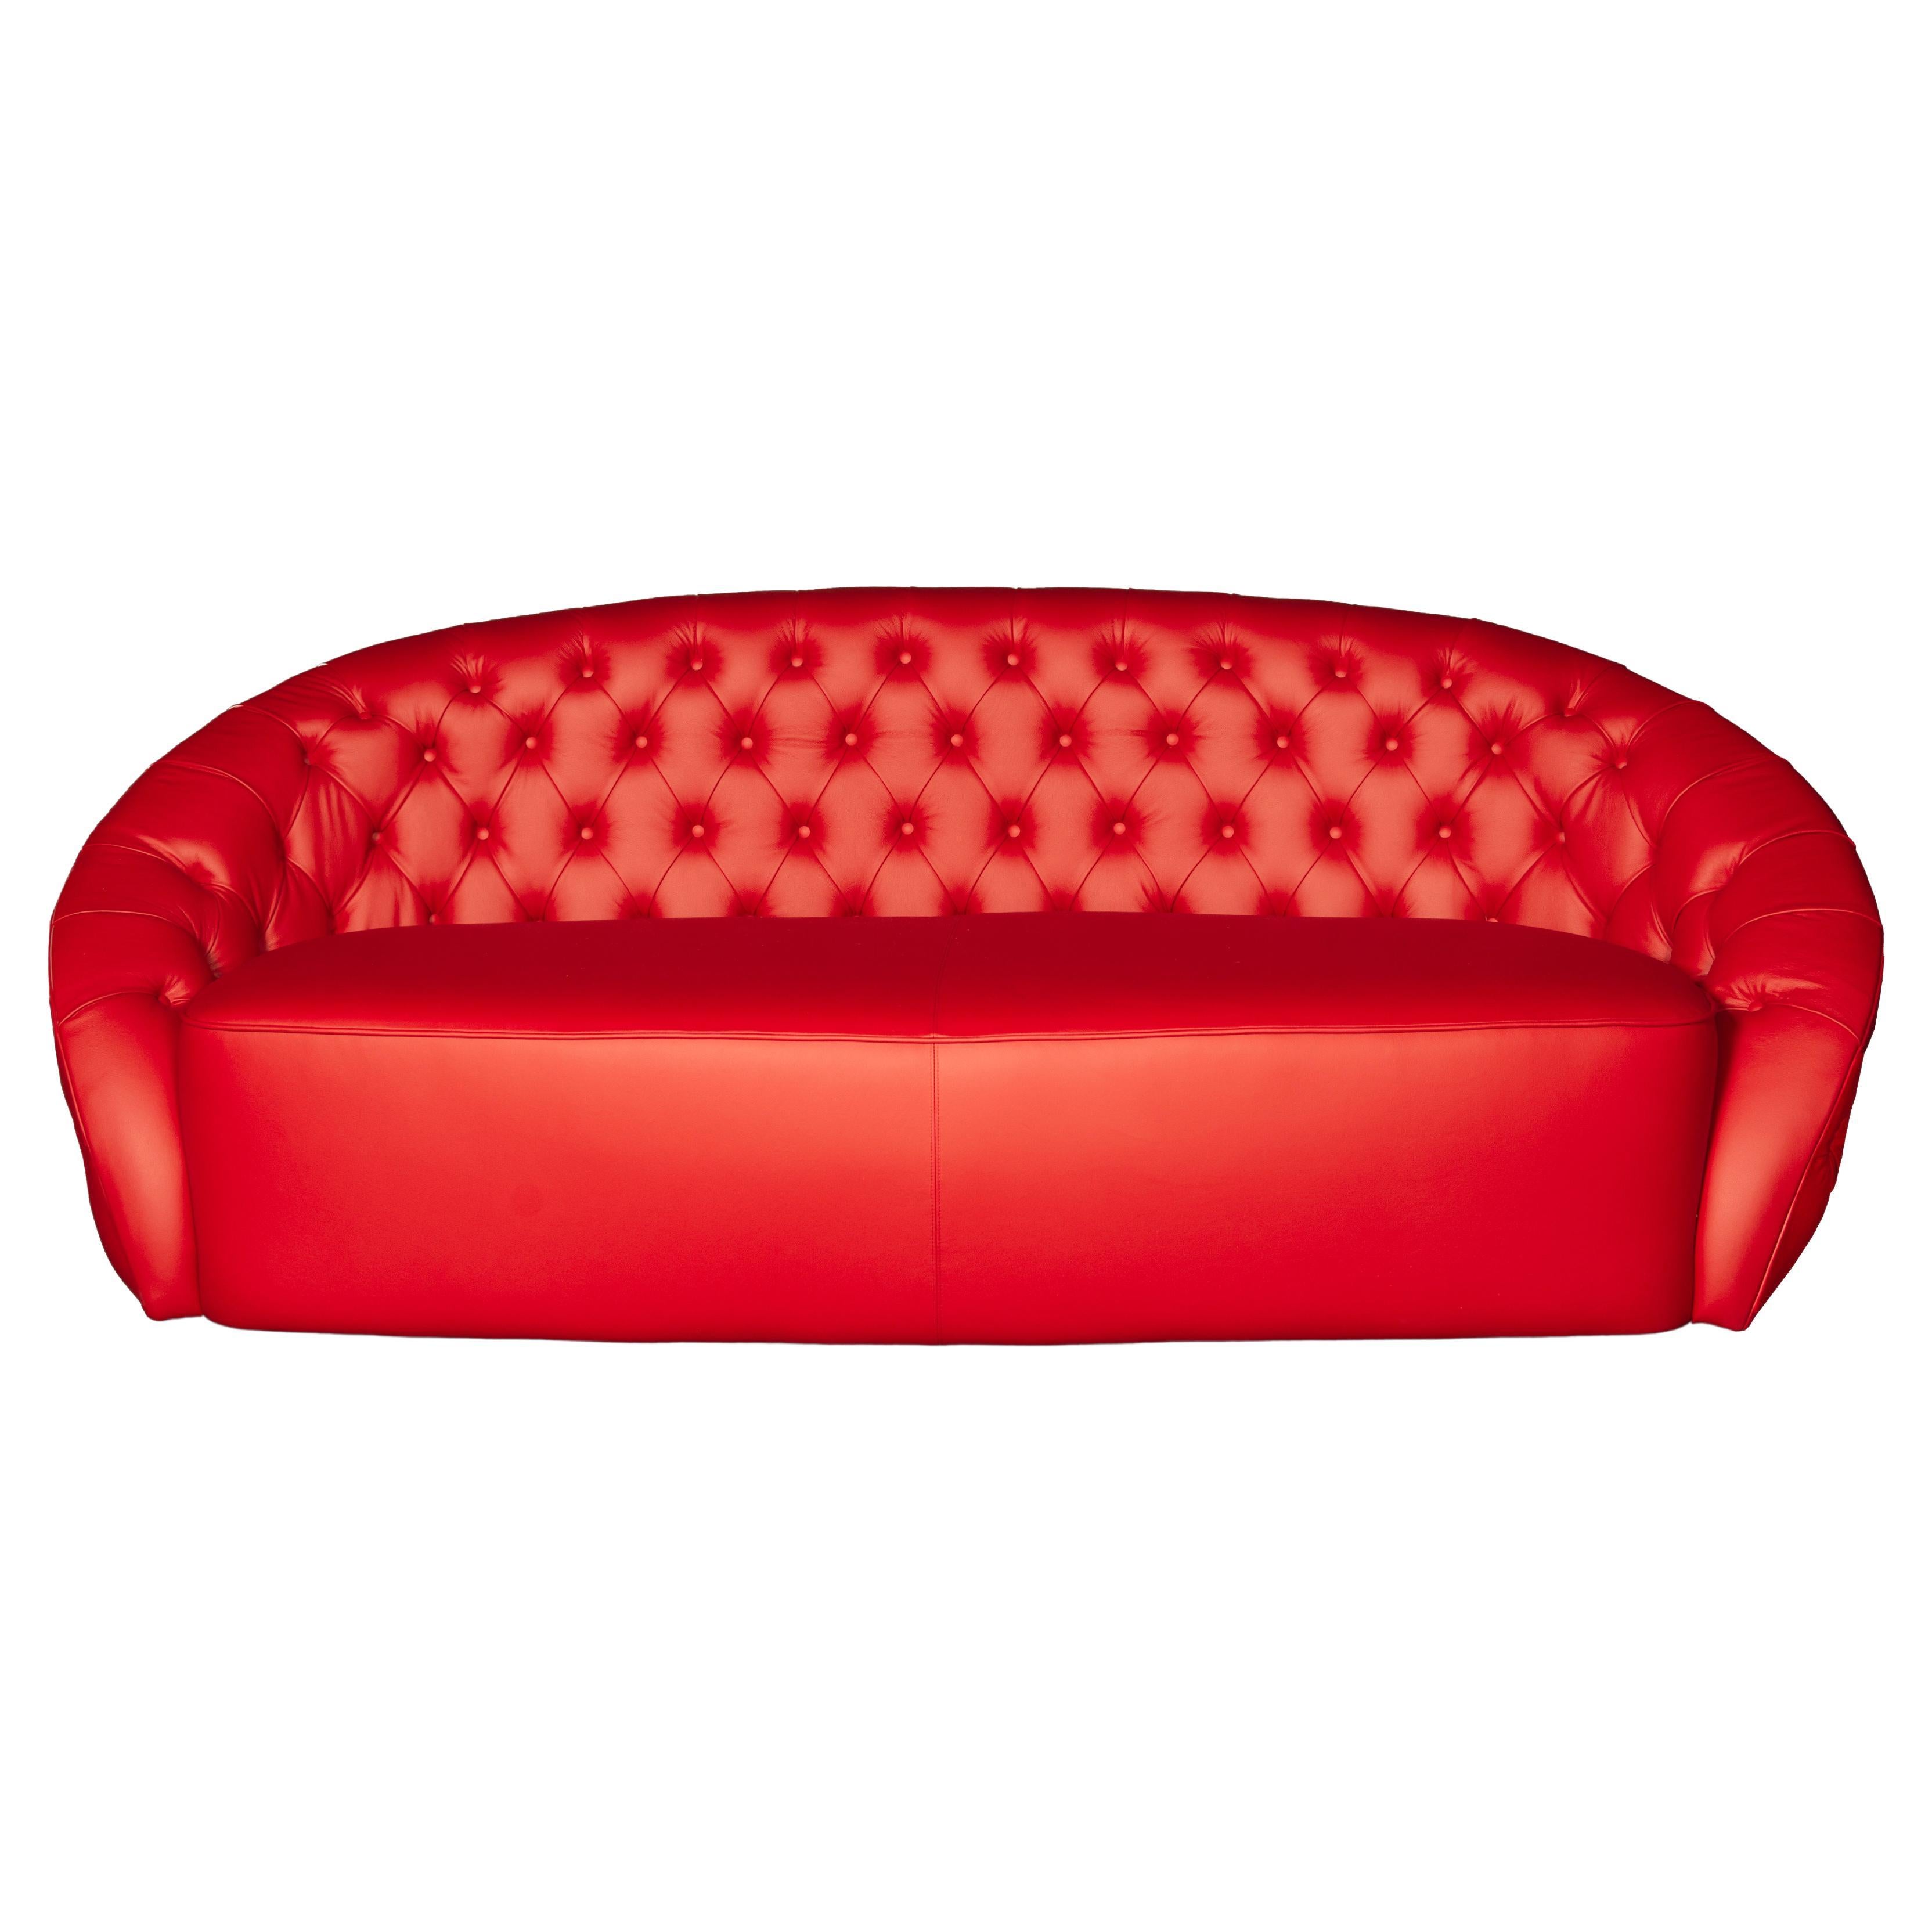 Sofa Round Capitonné, Red Leather, cm 250x115, Made in Italy